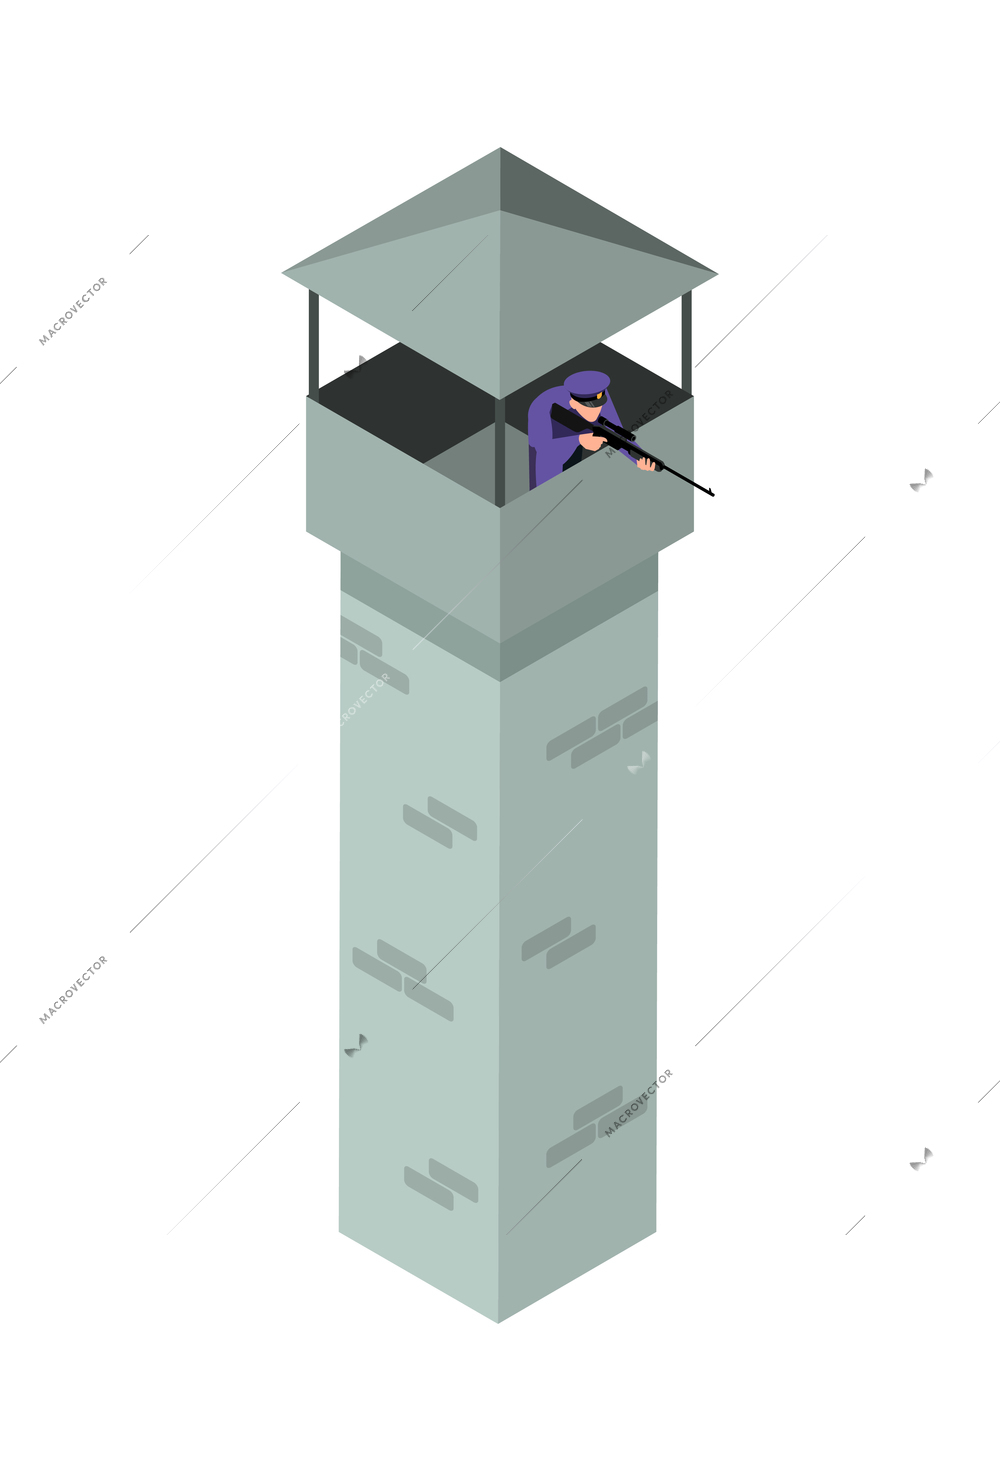 Jail tower with guard holding weapon isometric icon 3d vector illustration